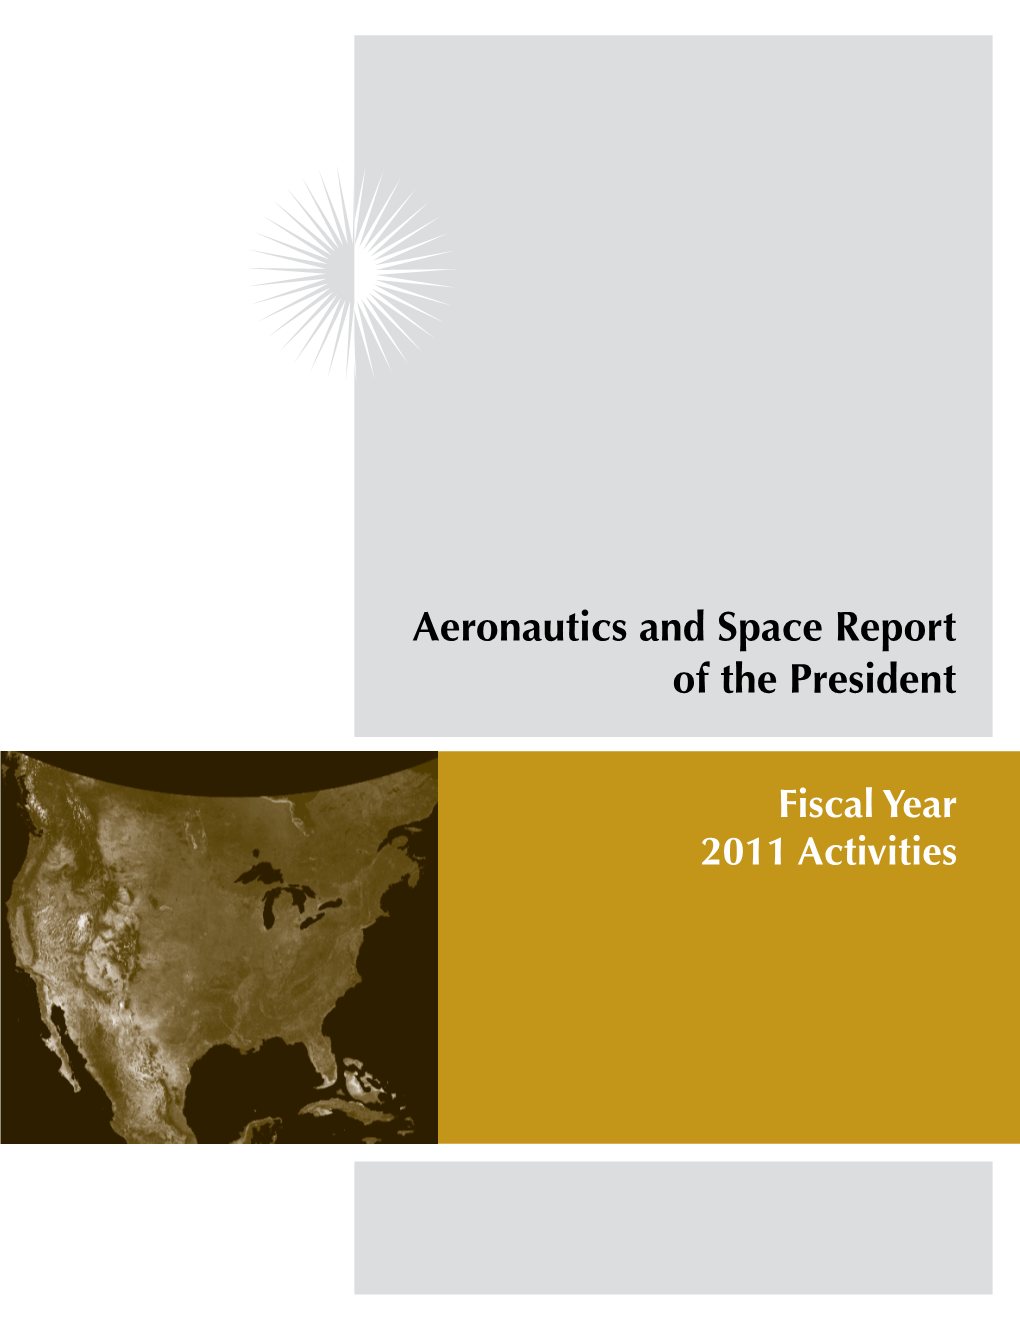 Aeronautics and Space Report of the President: Fiscal Year 2011 Activities